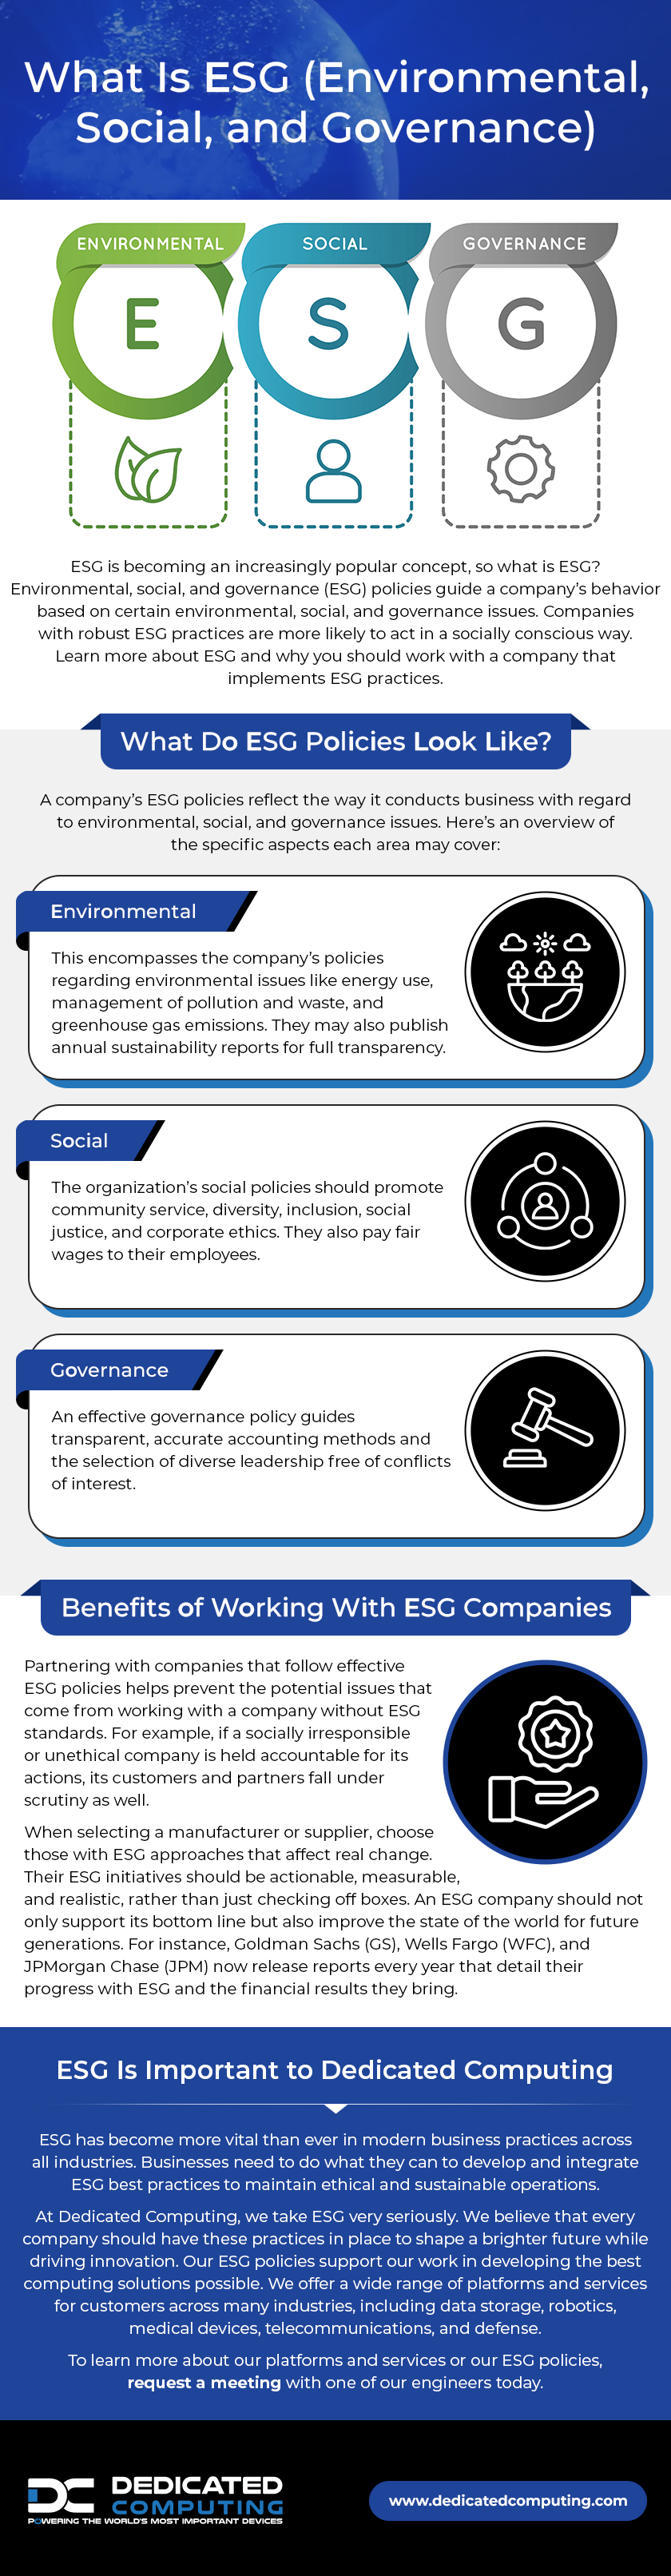 What Is ESG (Environmental, Social, and Governance)